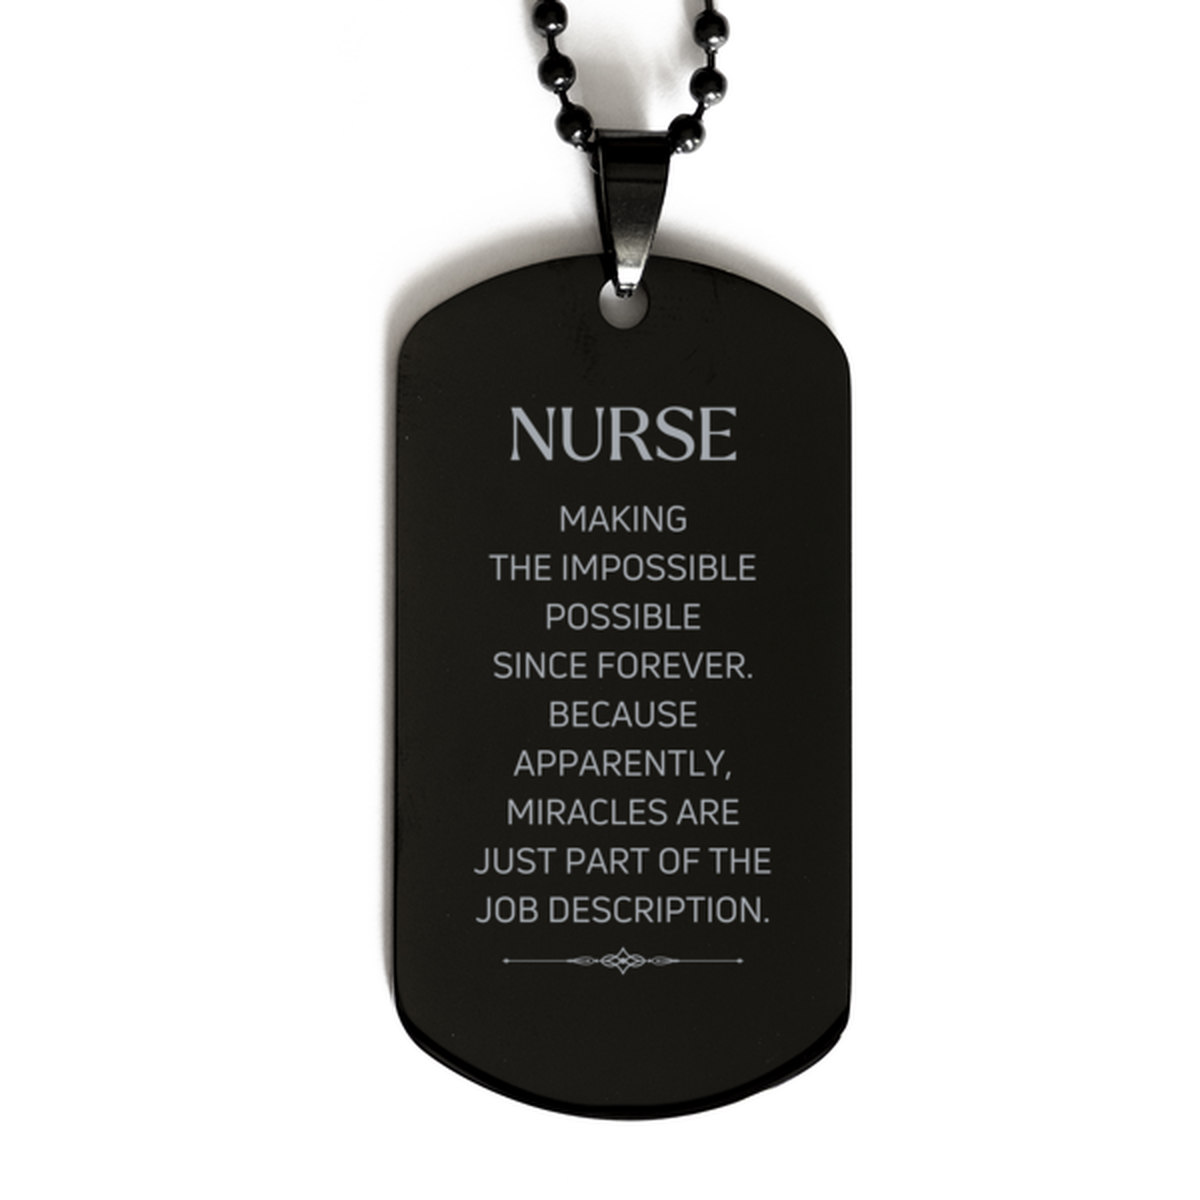 Funny Nurse Gifts, Miracles are just part of the job description, Inspirational Birthday Black Dog Tag For Nurse, Men, Women, Coworkers, Friends, Boss